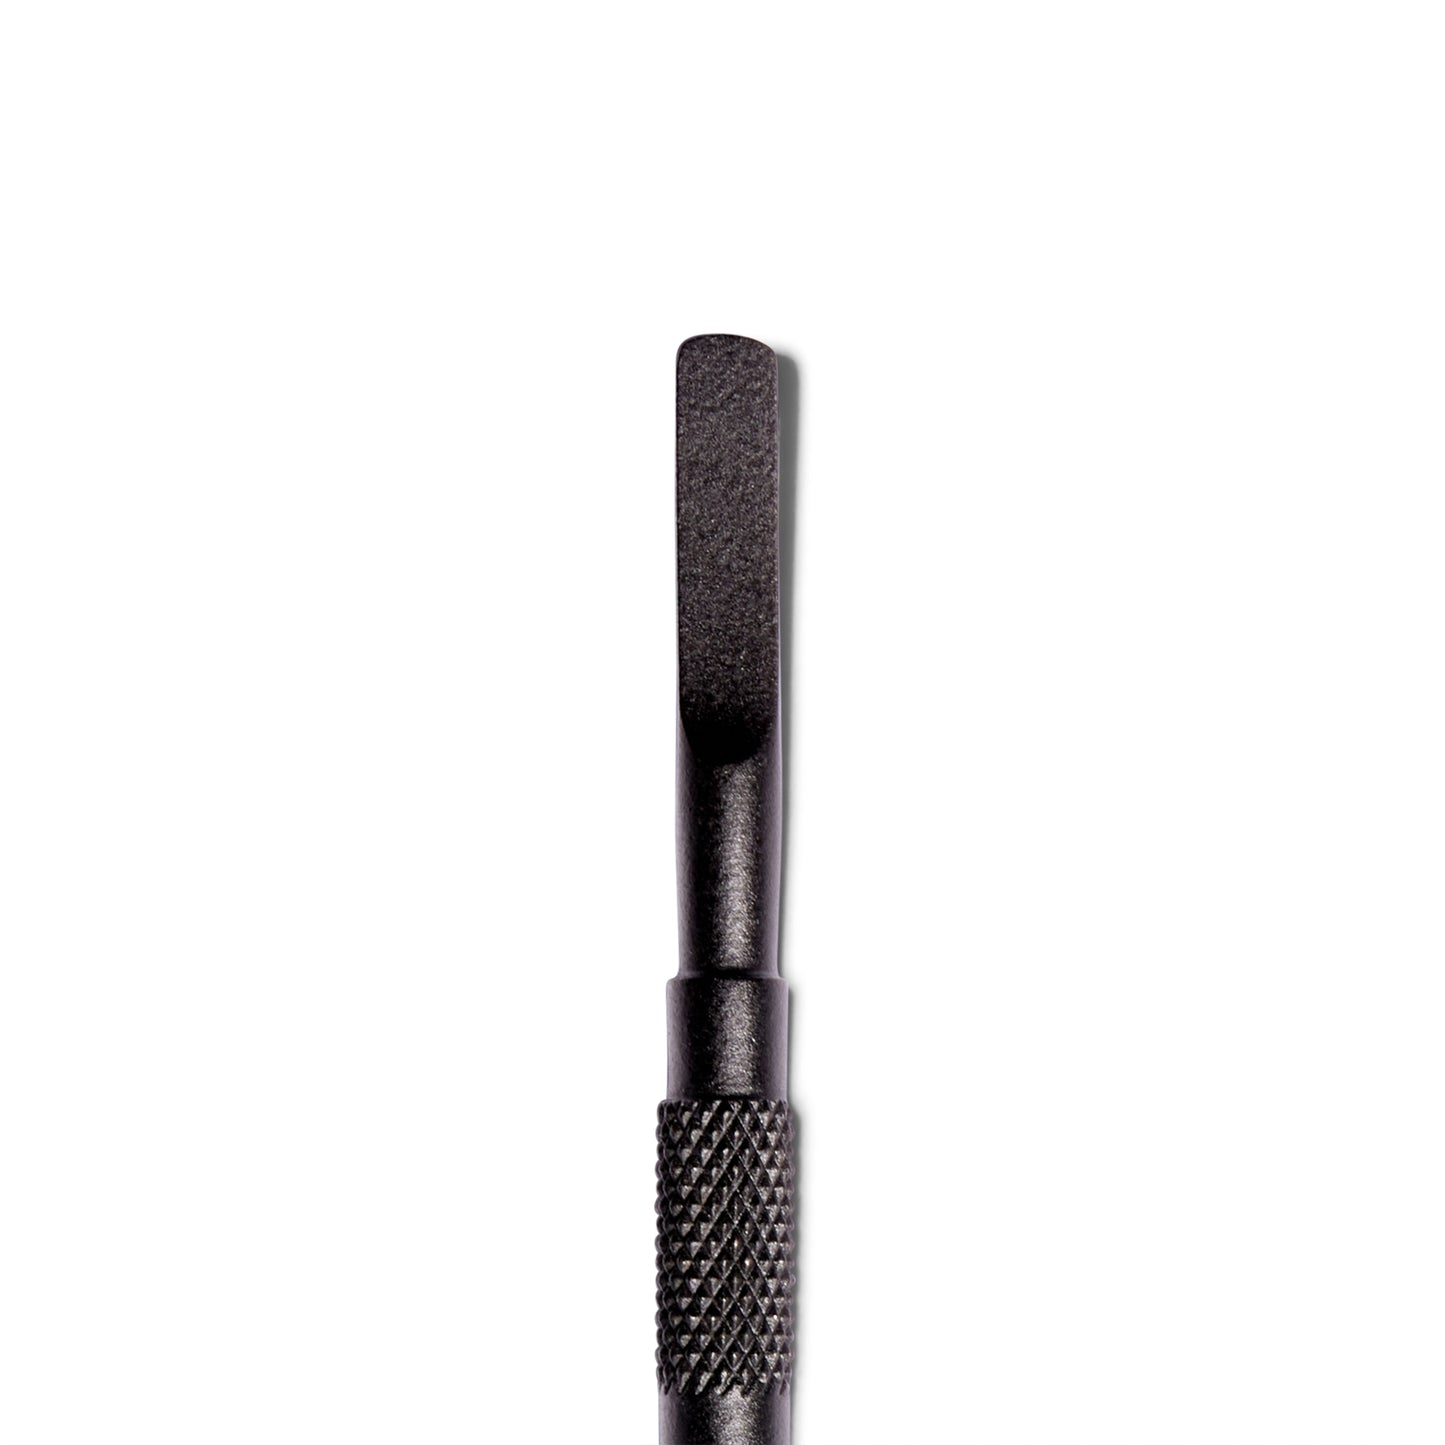 Close up of The Push Back cuticle pusher from ten over ten. This side is rounded on the edges and a matte black.